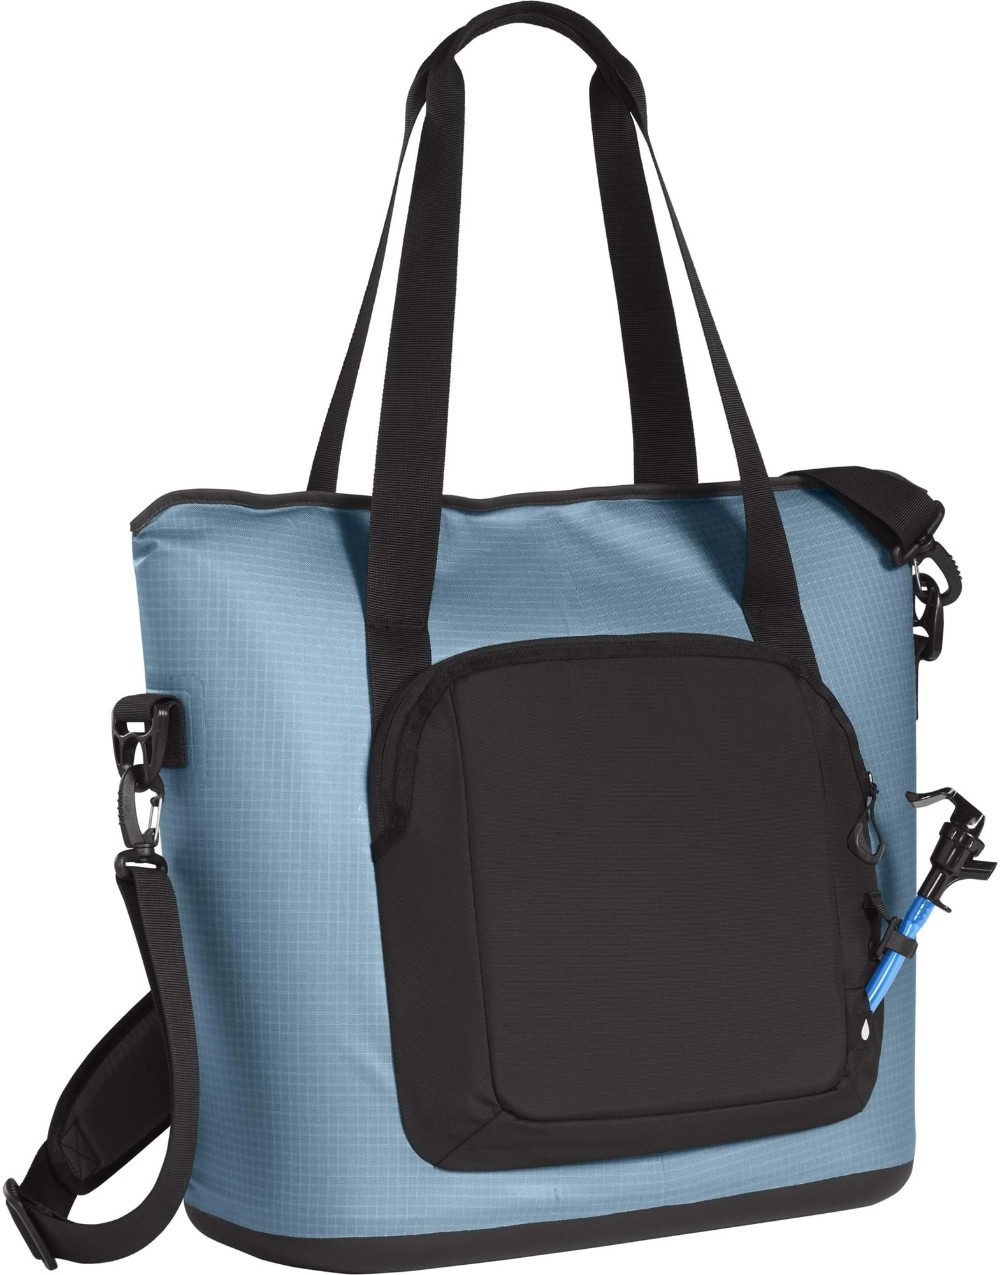 ChillBak Tote 18L Soft Cooler with 3L Fusion Group Reservoir image 1